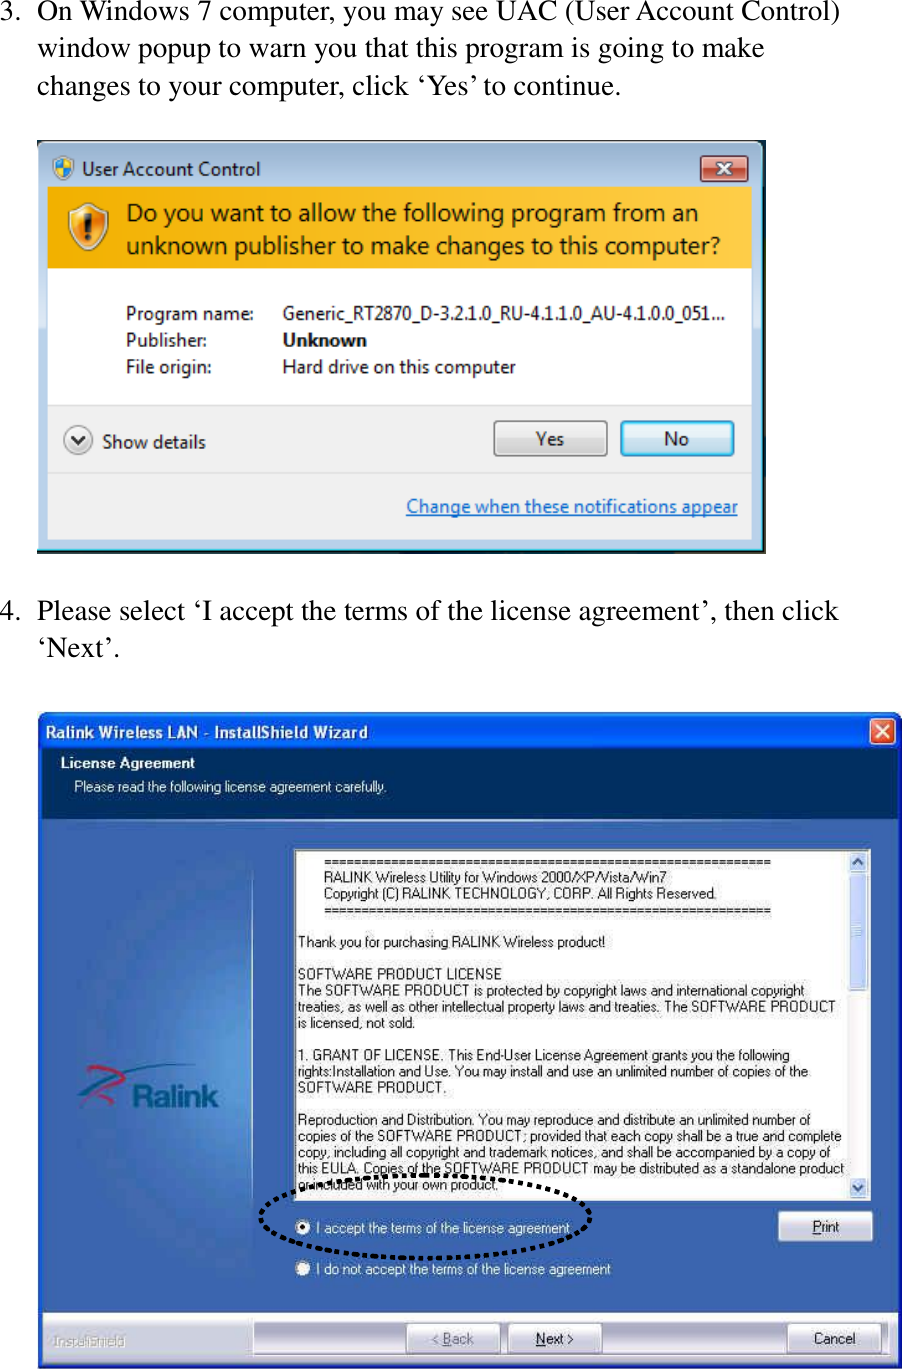 3. On Windows 7 computer, you may see UAC (User Account Control) window popup to warn you that this program is going to make changes to your computer, click ‘Yes’ to continue.    4. Please select ‘I accept the terms of the license agreement’, then click ‘Next’.    